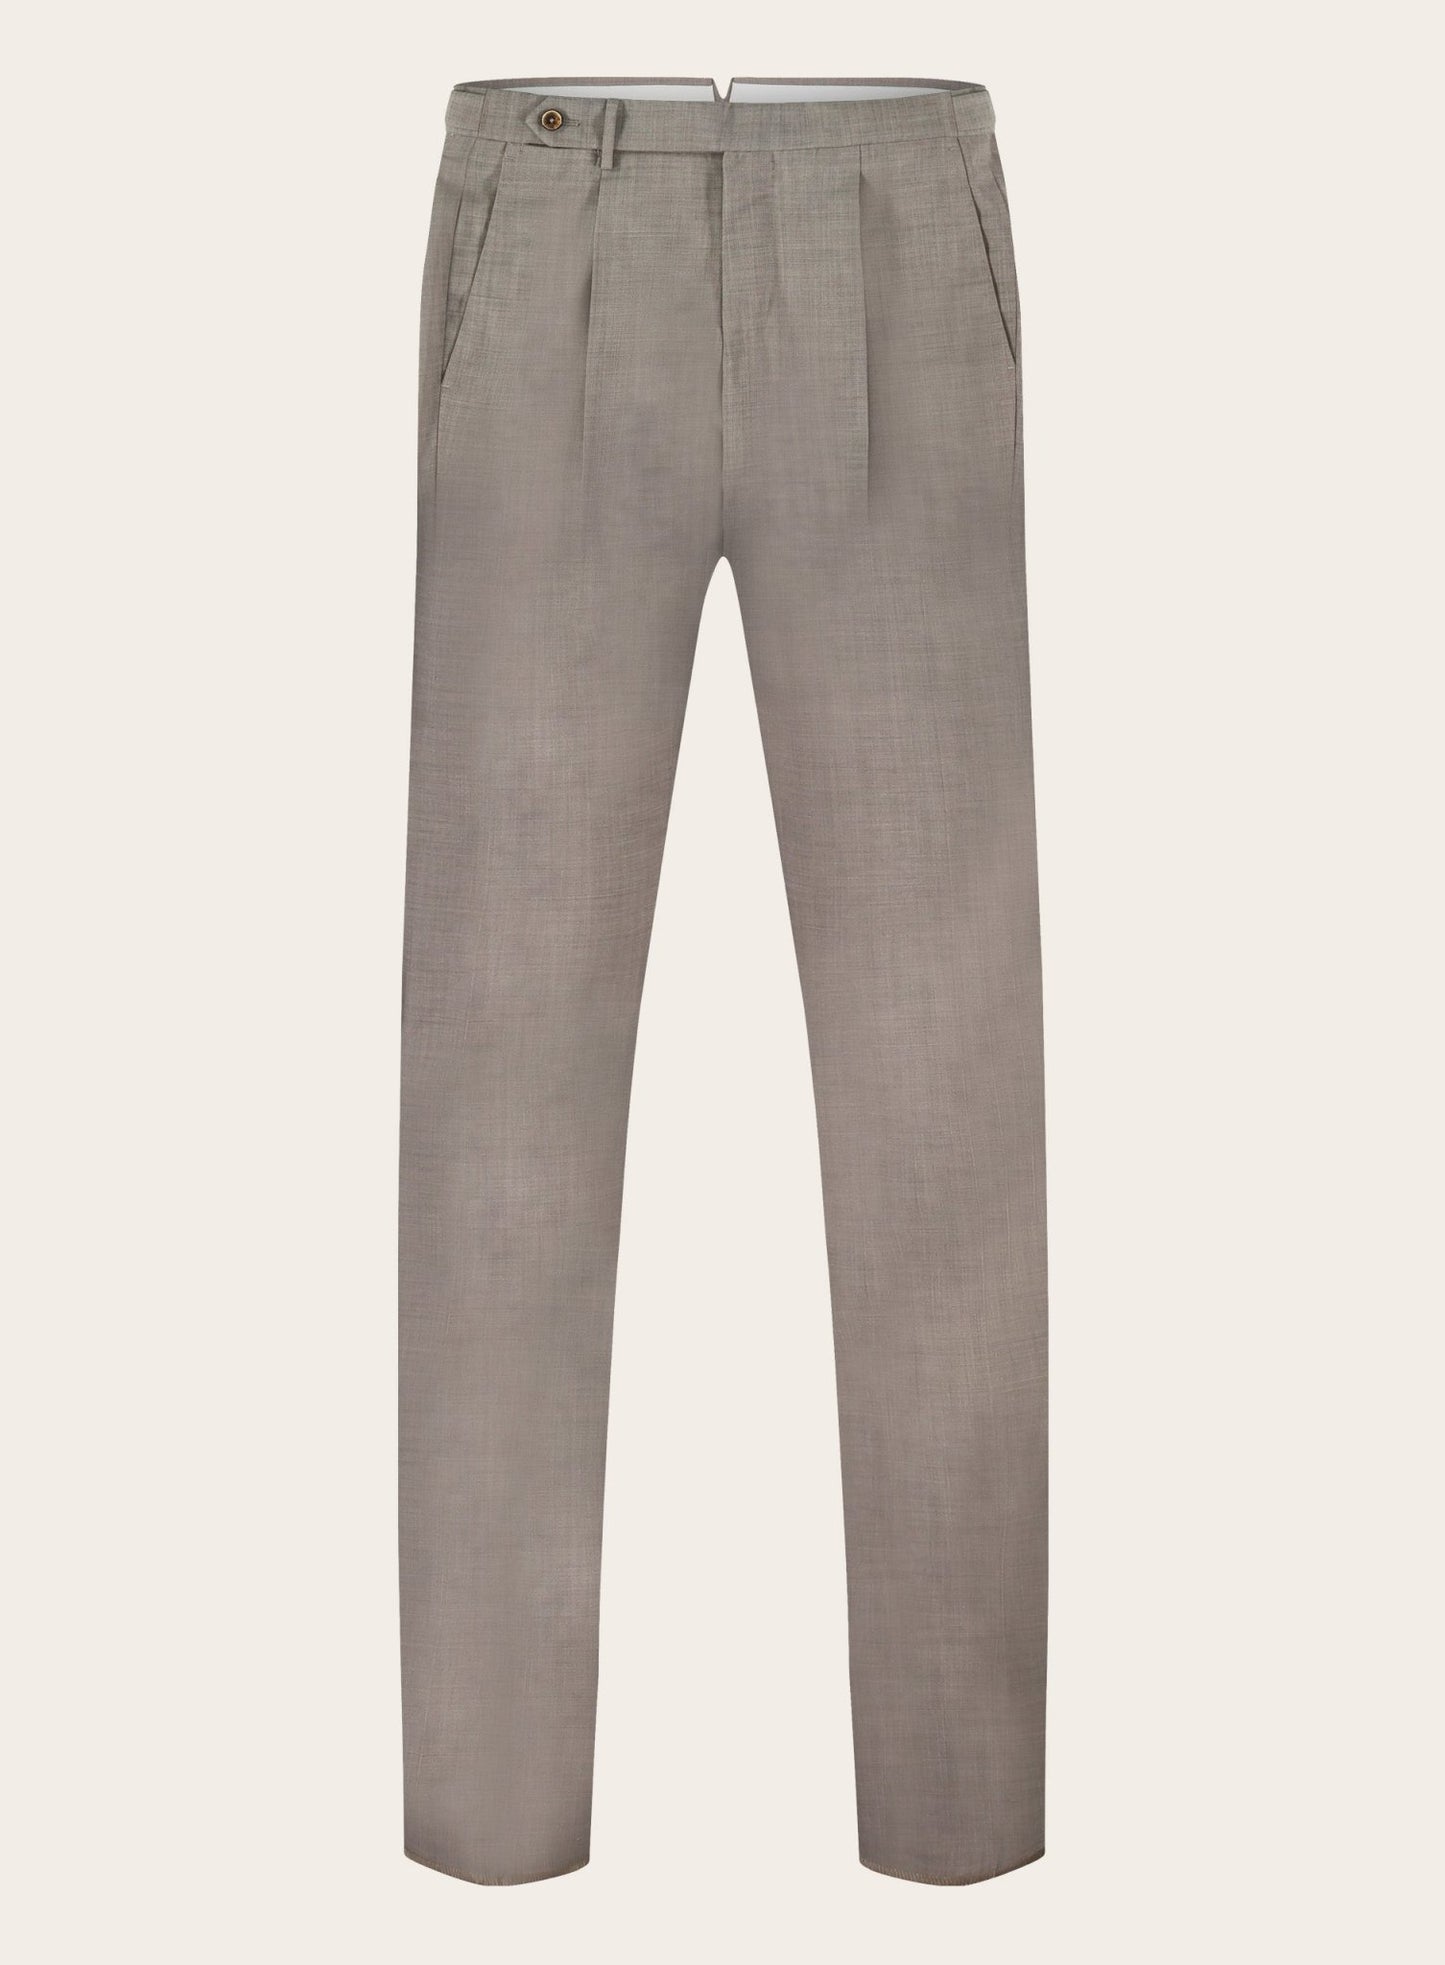 Trousers made of wool and elastane